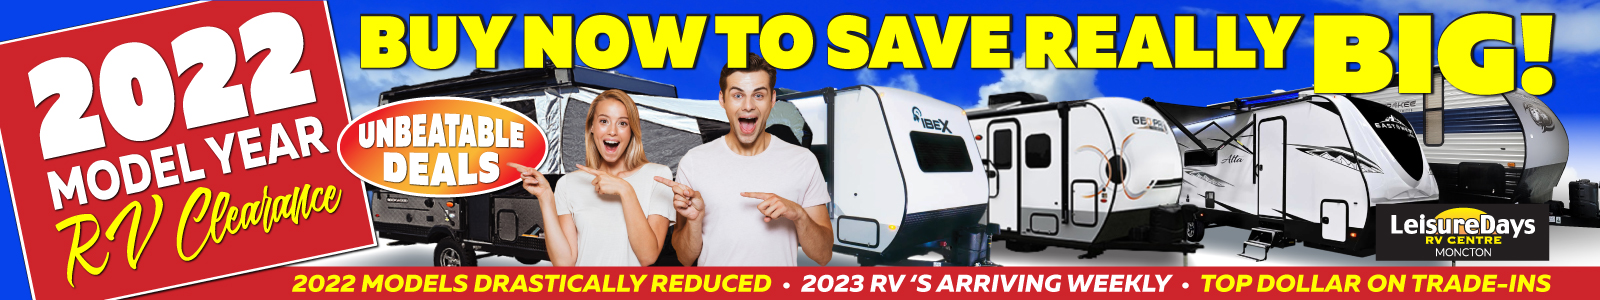 BUY NOW SAVE REALLY BIG - 2022 MODEL CLEARANCE